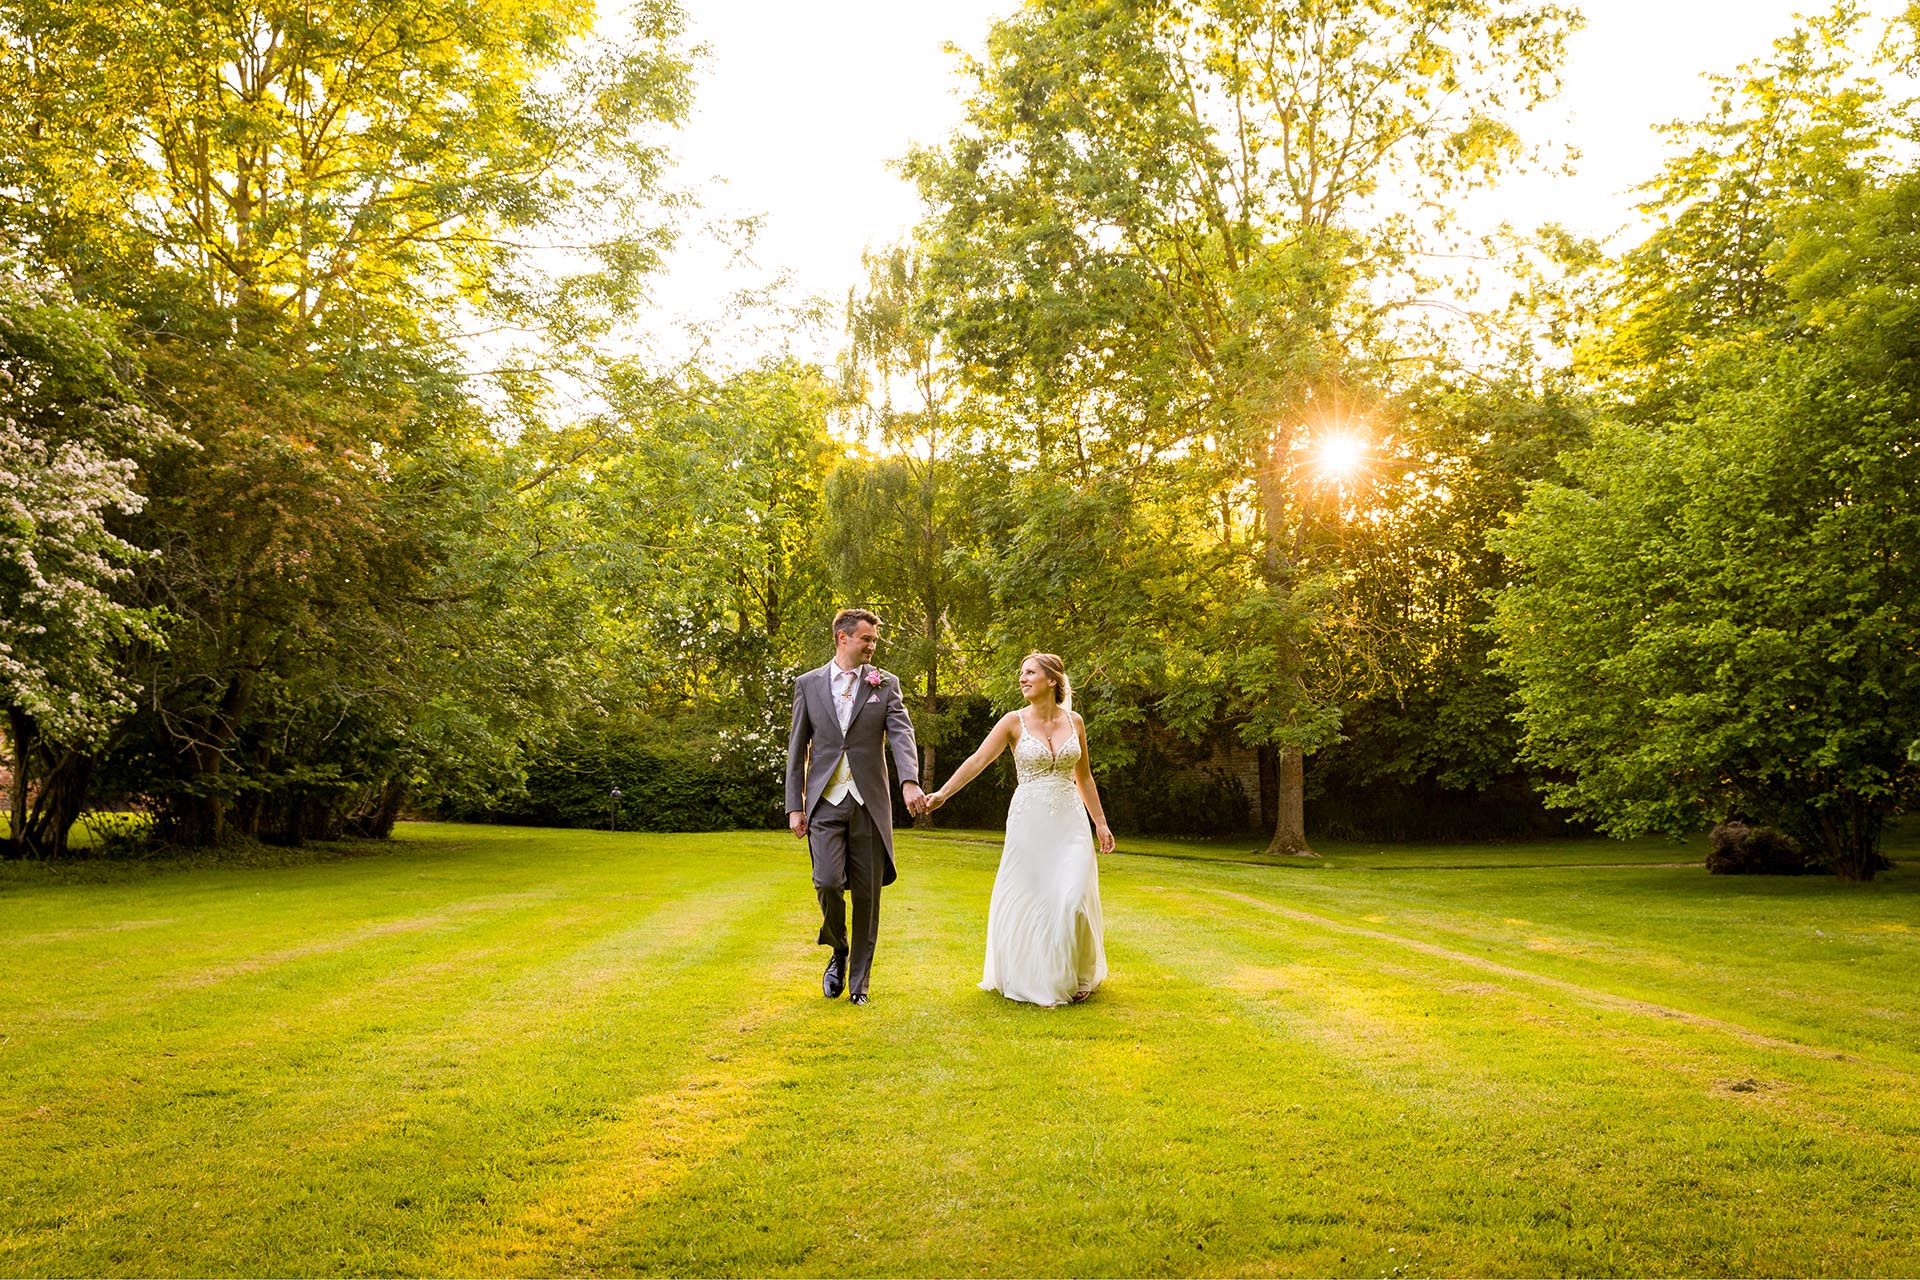 Bride and groom golden light photograph at Leez Priory, Great Leighs, Chelmsford, Essex